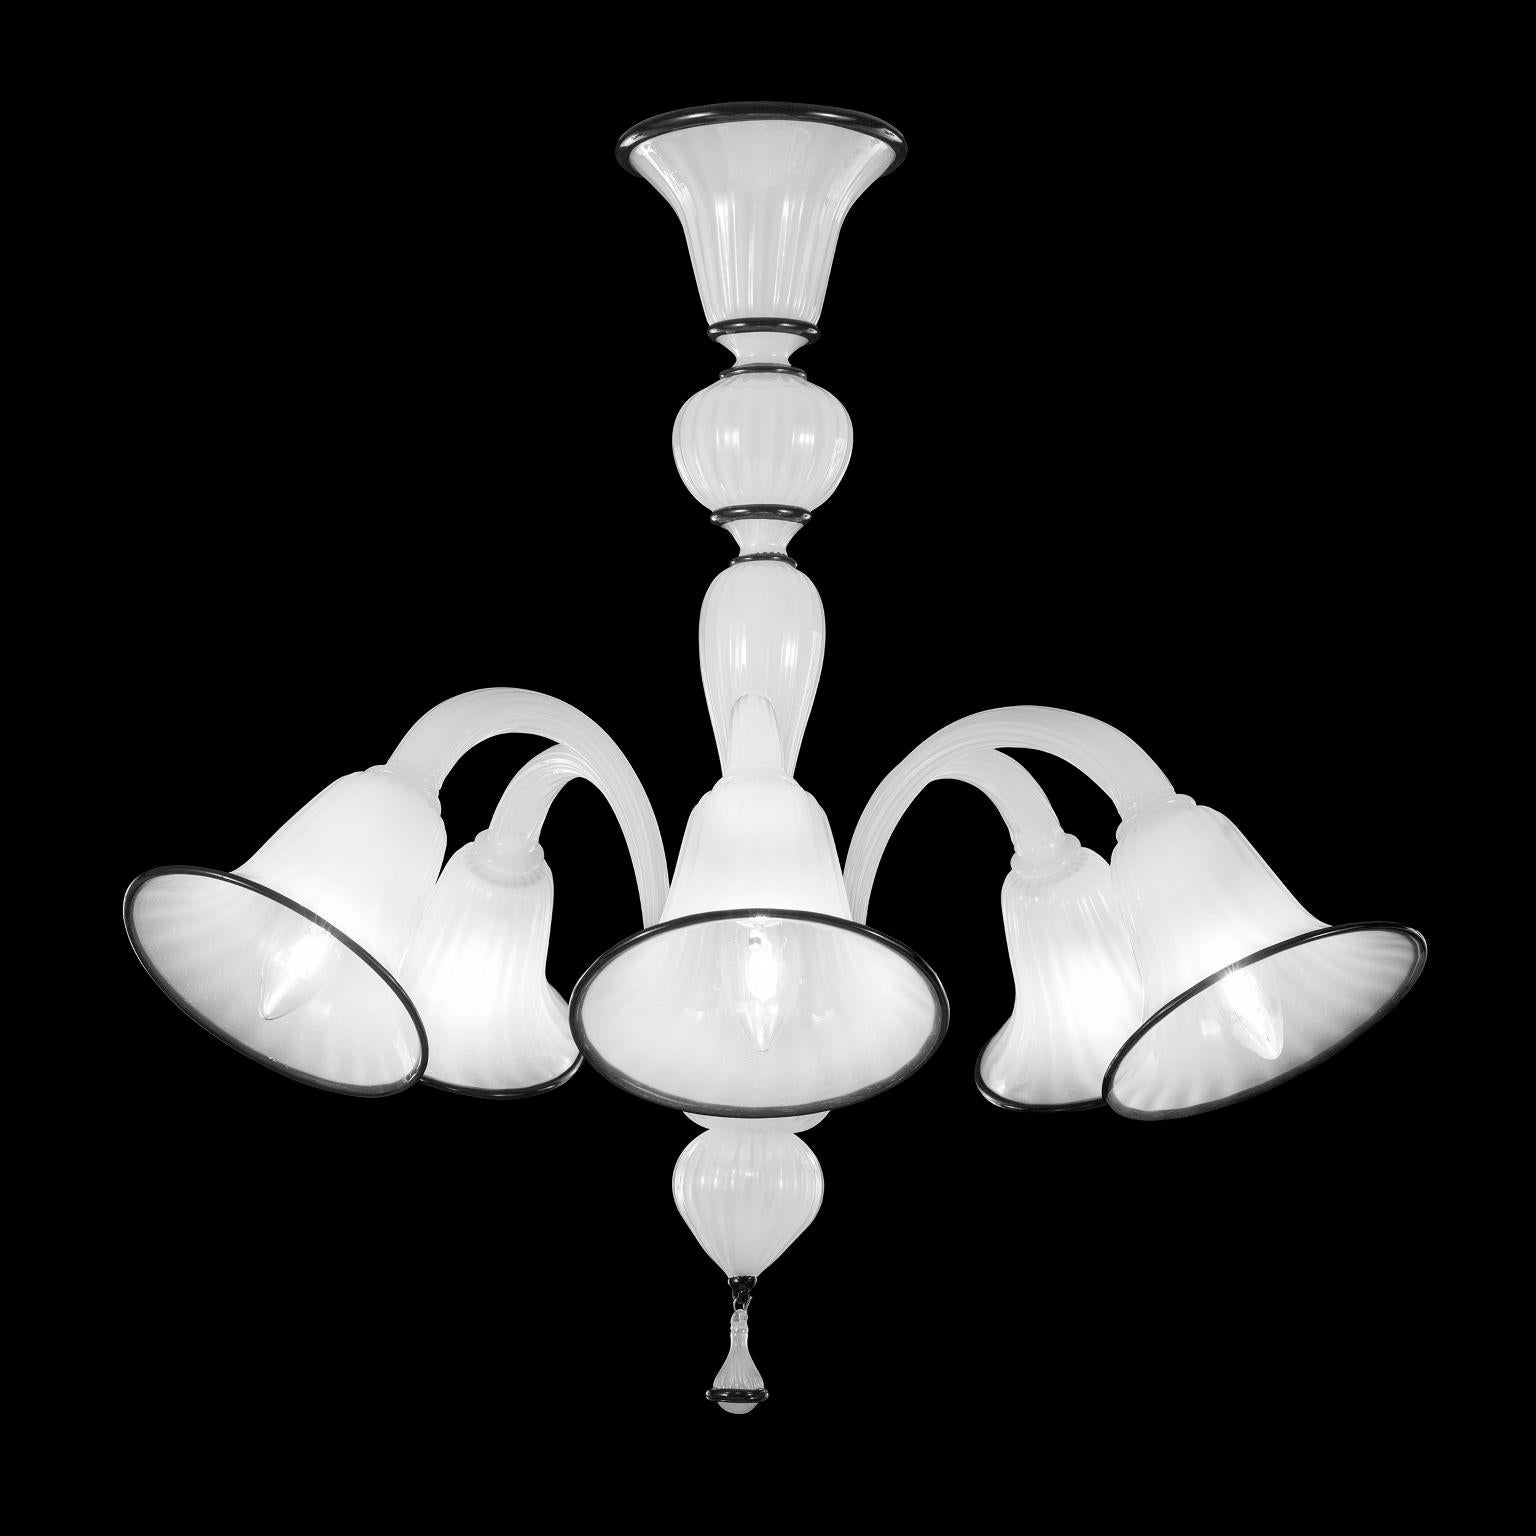 Simplicissimus 390 chandelier, 6 lights, in silk artistic glass, black details by Multiforme 
This collection in Murano glass is characterized by downward lights and superb simplicity. It is the result of a research which harks back to the Classic